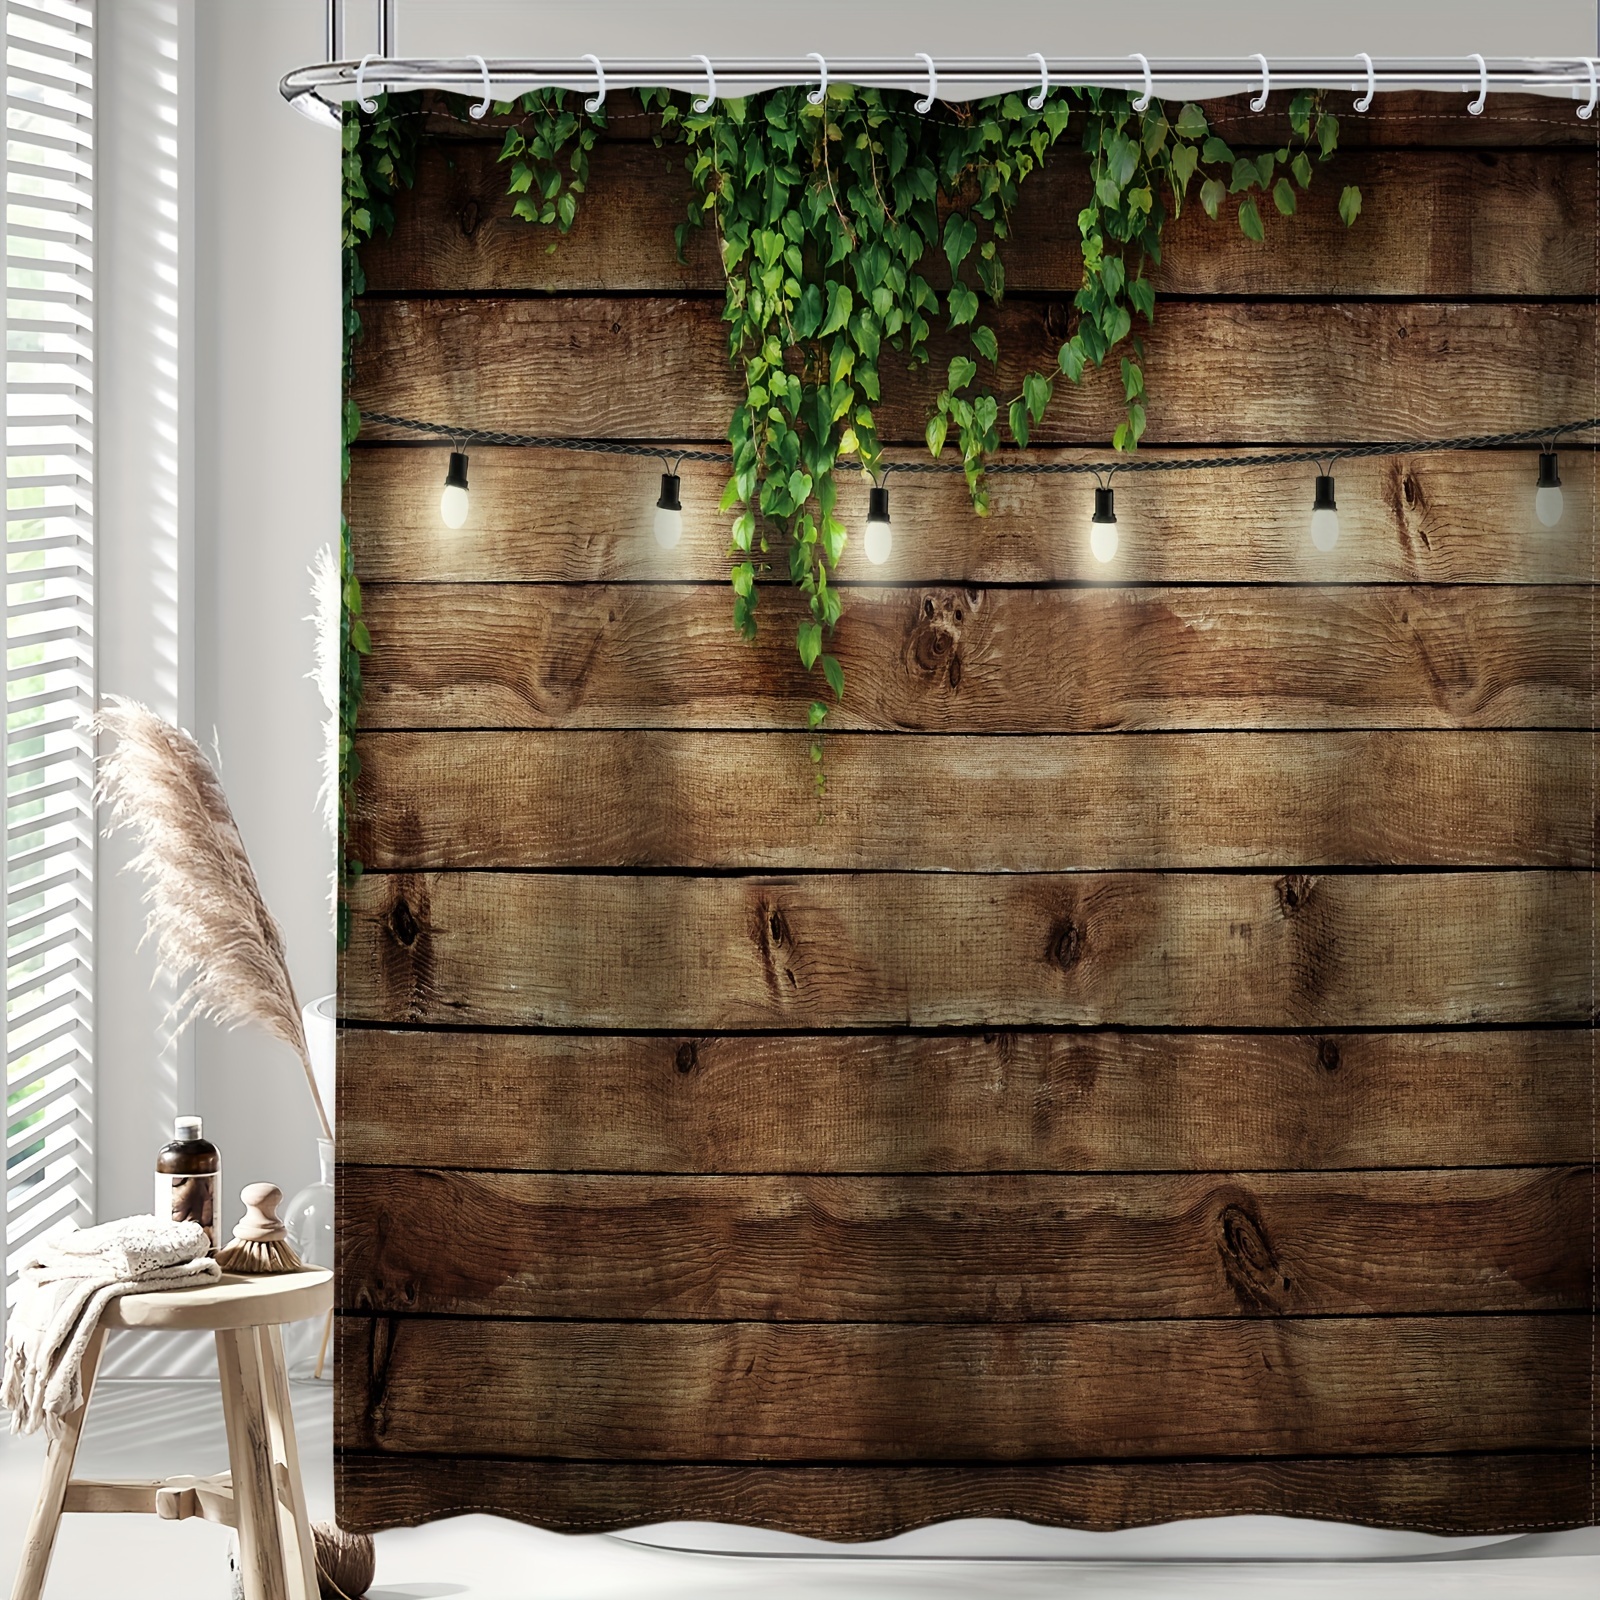 

1pc Rustic Farmhouse Outdoor Shower Curtain, Scenery Wooden Door Green Leaves Antique Brown Wall Lights Bathroom Home Decor, Waterproof Polyester, 12 Pack Hooks, 72wx72h Inch